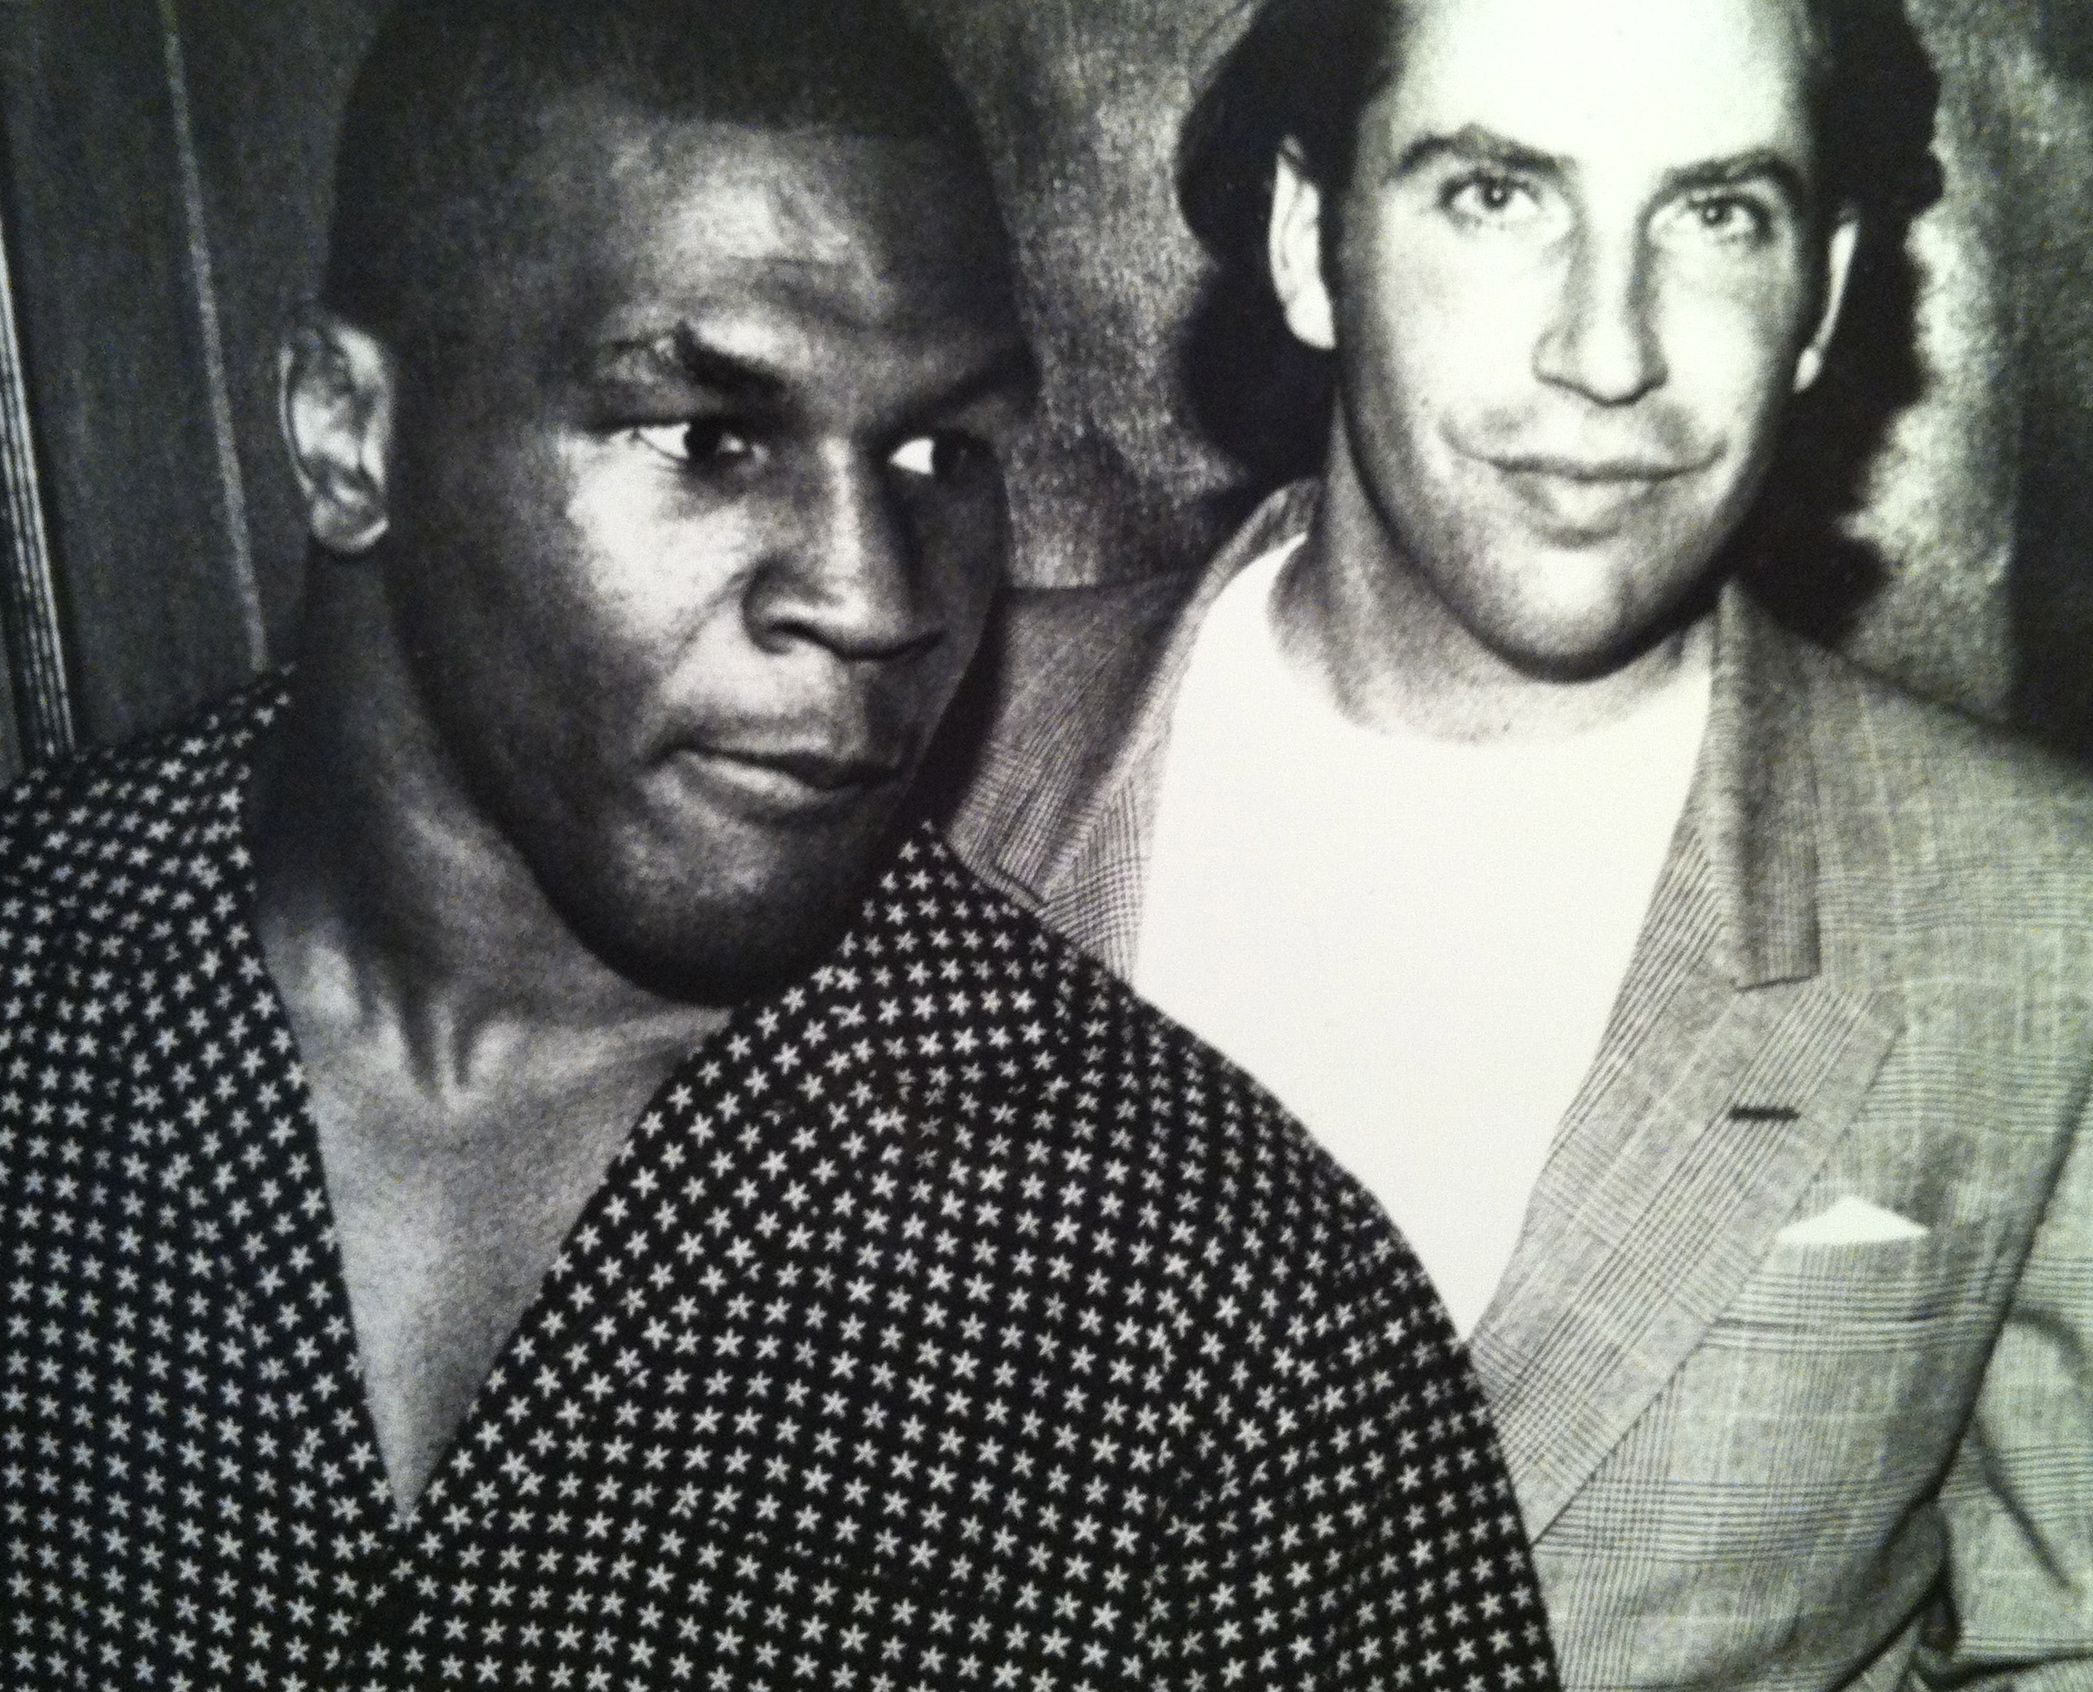 Mike Tyson & Henri Kessler at Whitney Houston / Clive Davis Event in NYC 1992